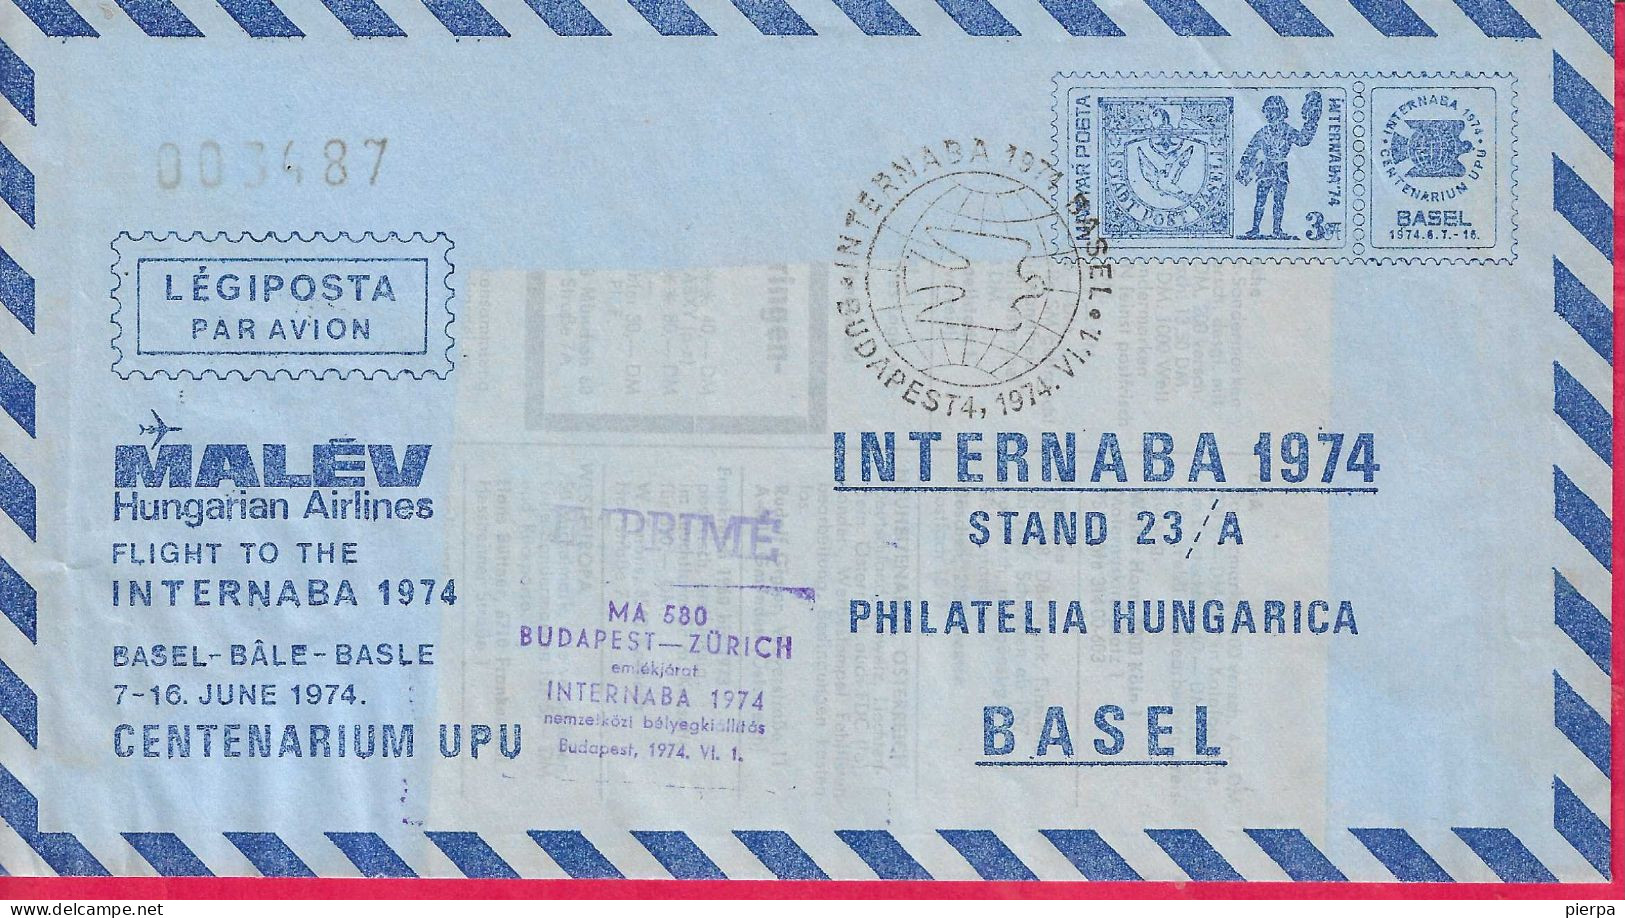 UNGHERIA - FLIGHT MALEV HUNGARIAN AIRLINES TO INTERNABA 1974 - BASEL - BUDAPERS *1.VI.1974* ON STATIONERY - Cartas & Documentos